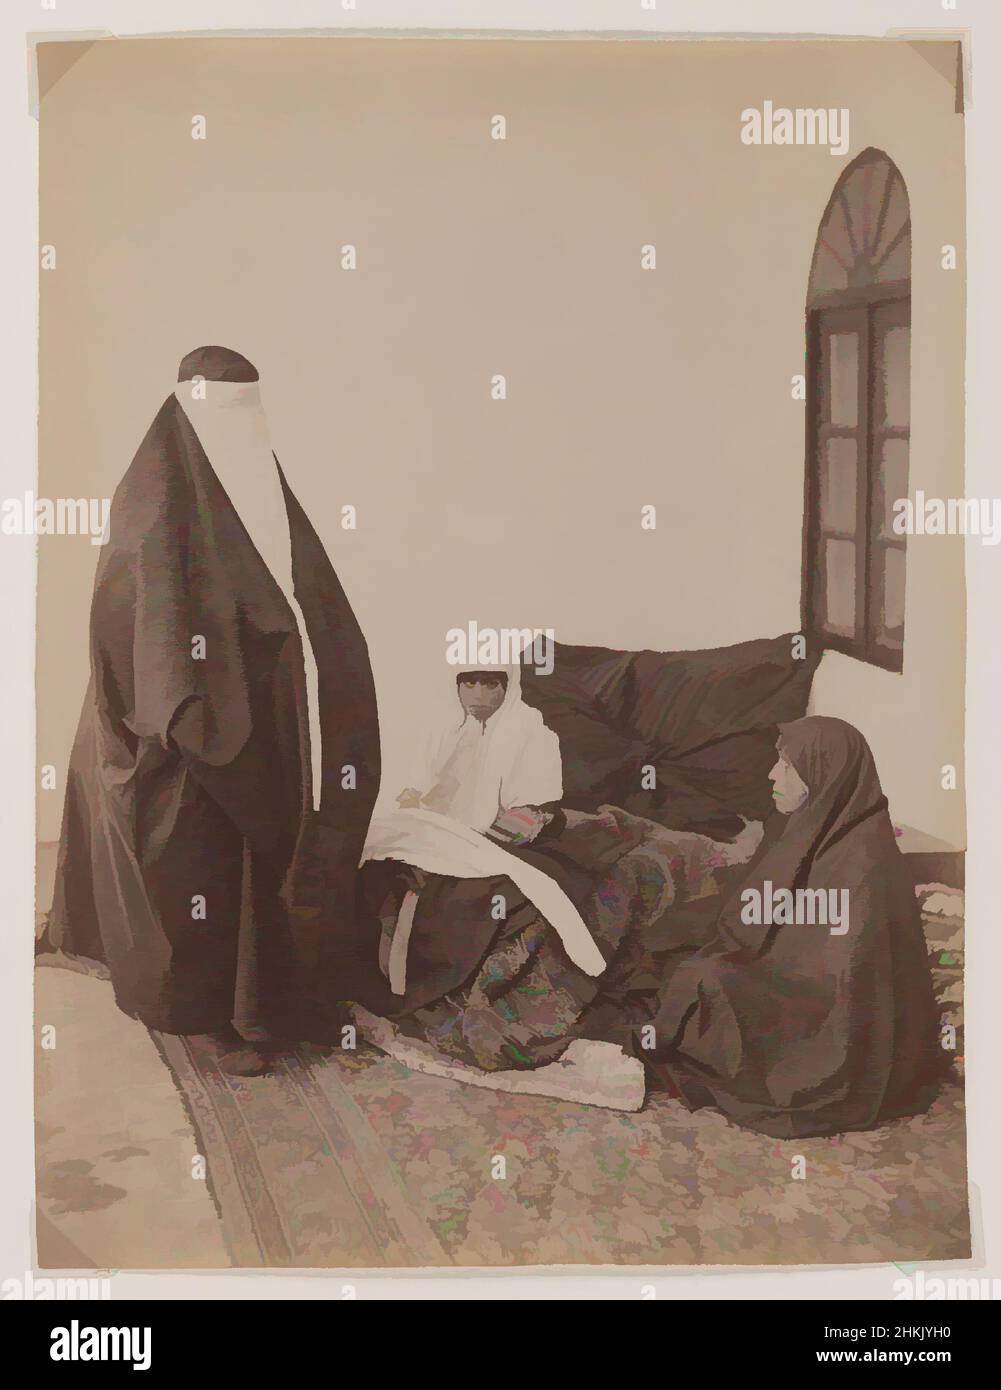 Art inspired by Two Veiled Women and a Child, Possibly Antoin Sevruguin, Albumen silver photograph, late 19th century, Qajar, Qajar Period, 9 1/8 x 6 3/16 in., 23.2 x 15.7 cm, clothing, dress, harem, hijab, interior, Iran, lifestyle, Middle East, Persian, Persian carpet, private, Classic works modernized by Artotop with a splash of modernity. Shapes, color and value, eye-catching visual impact on art. Emotions through freedom of artworks in a contemporary way. A timeless message pursuing a wildly creative new direction. Artists turning to the digital medium and creating the Artotop NFT Stock Photo